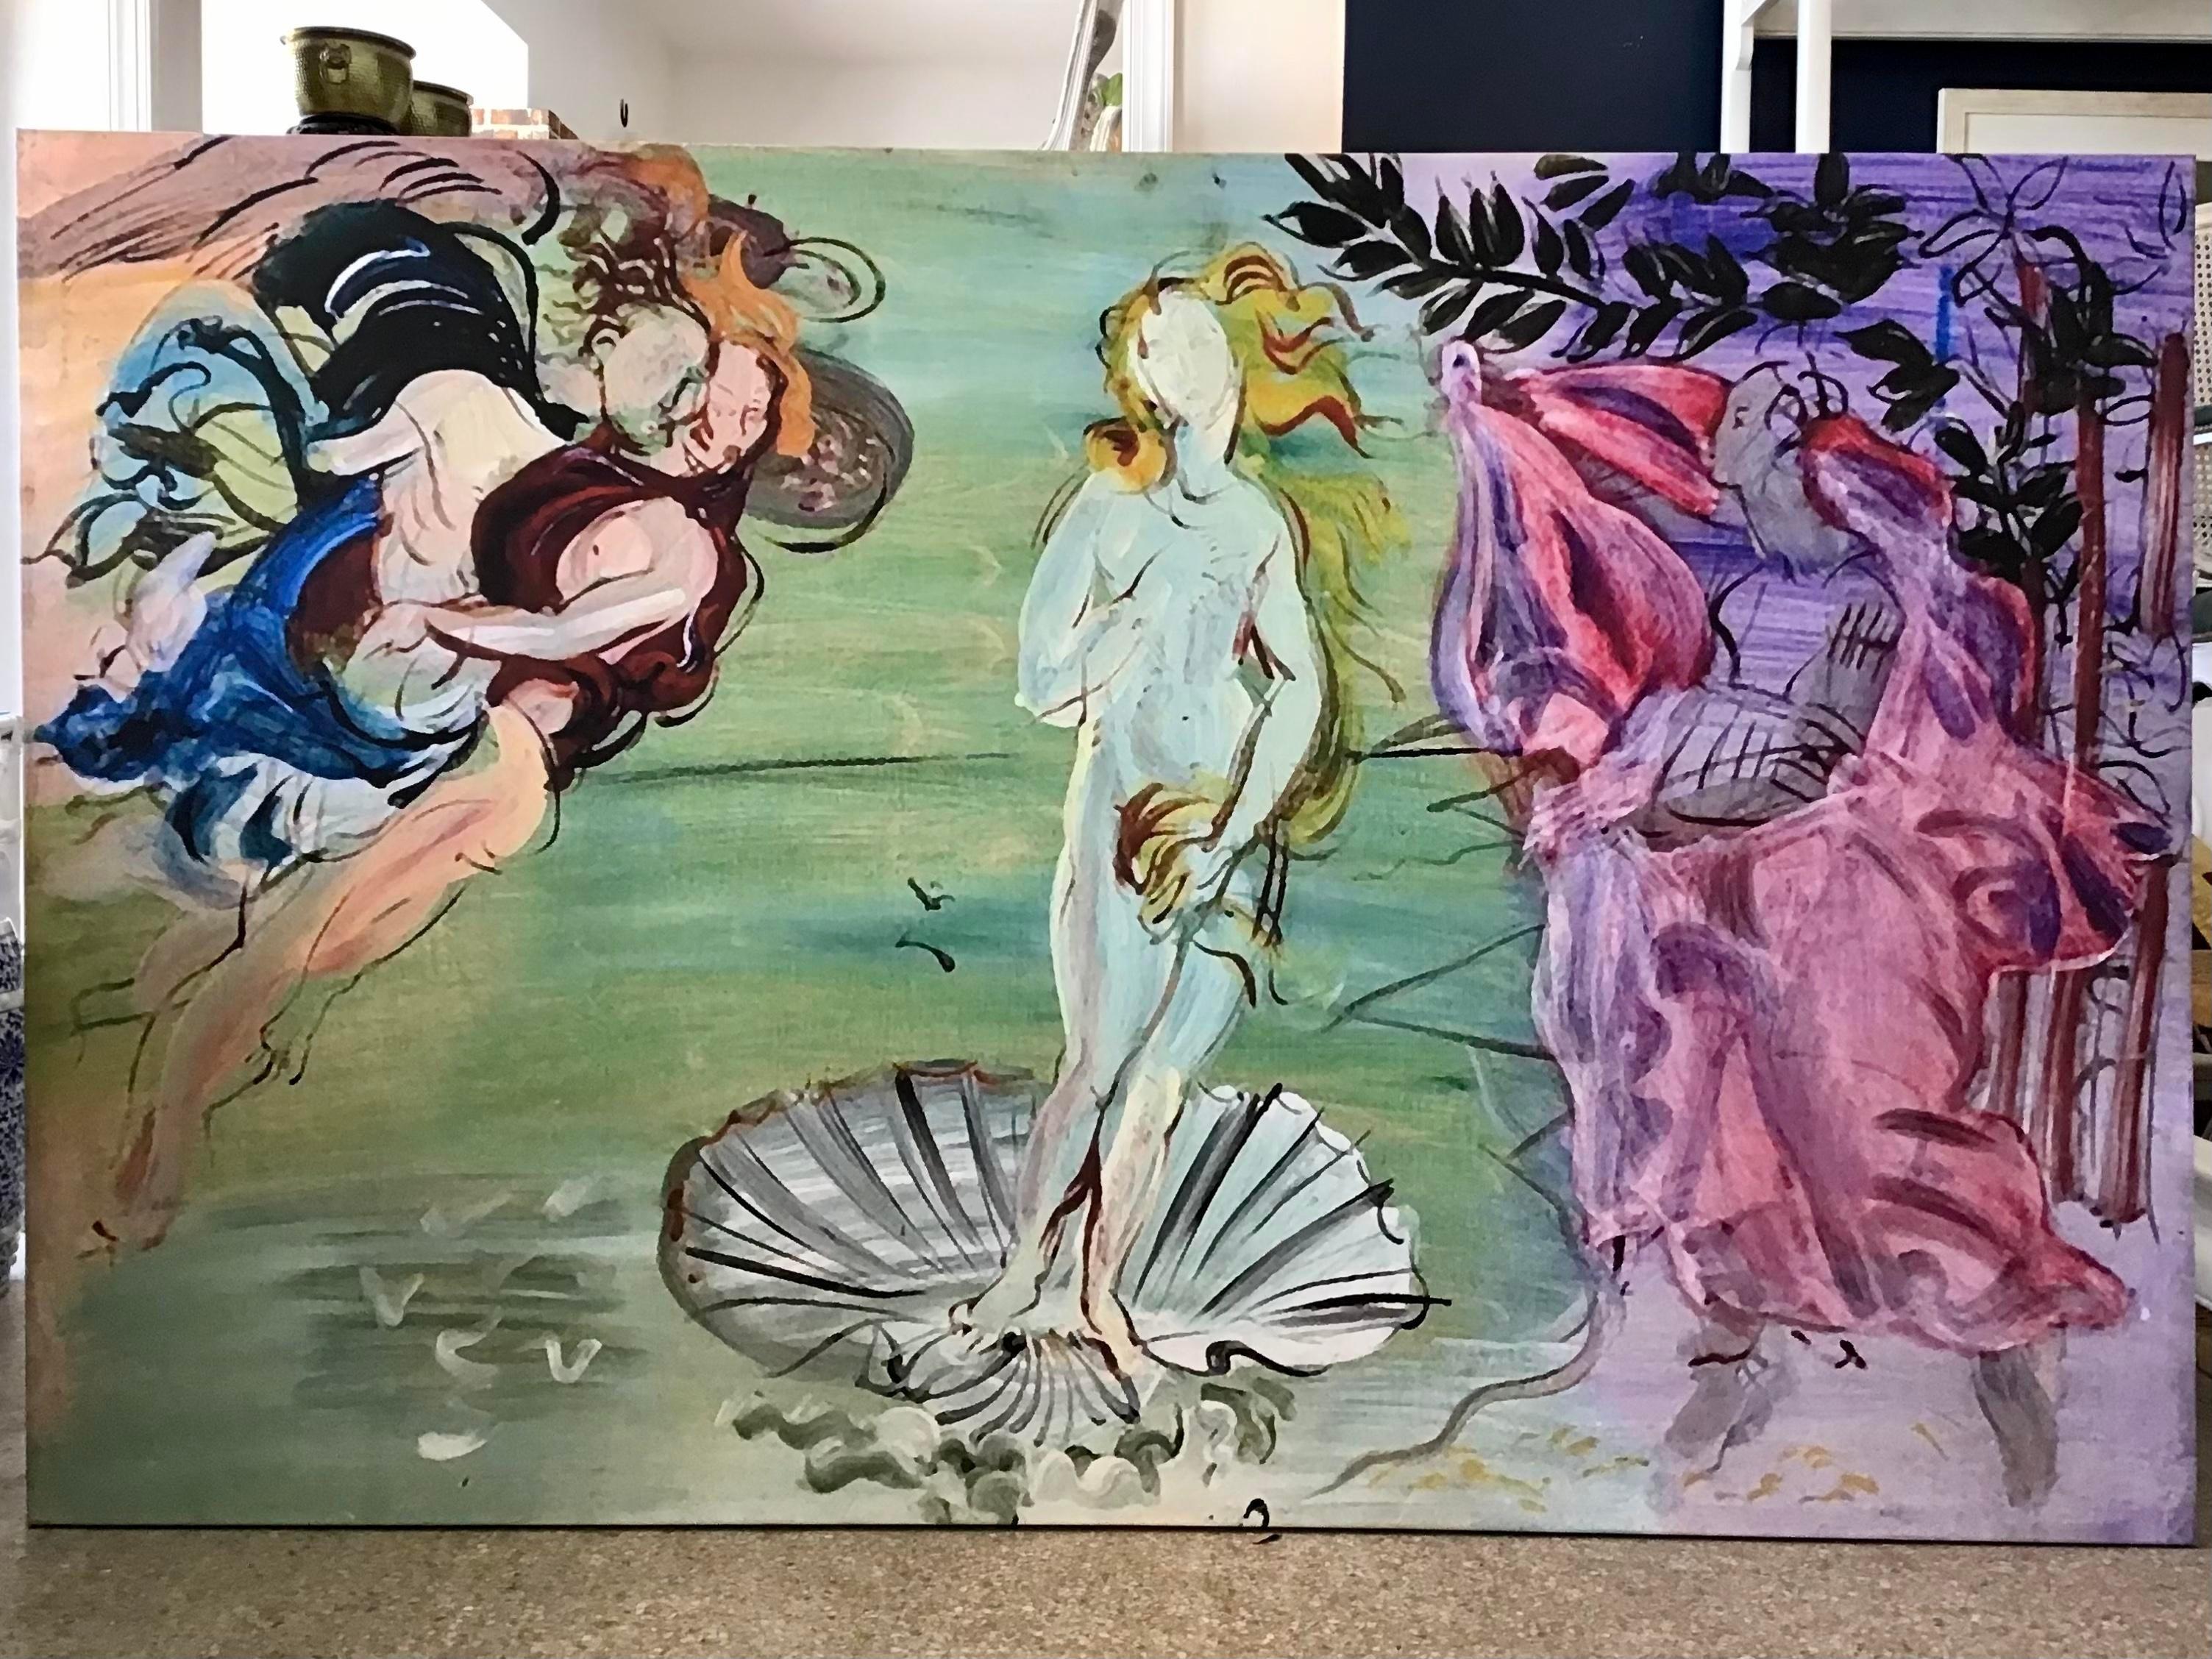 Gorgeous painting printed on canvas depicting the birth of Venus in the style of famed French painter Raoul Dufy. We have two copies available so collect both and give some creative decor to your tropical and grotto inspired home.